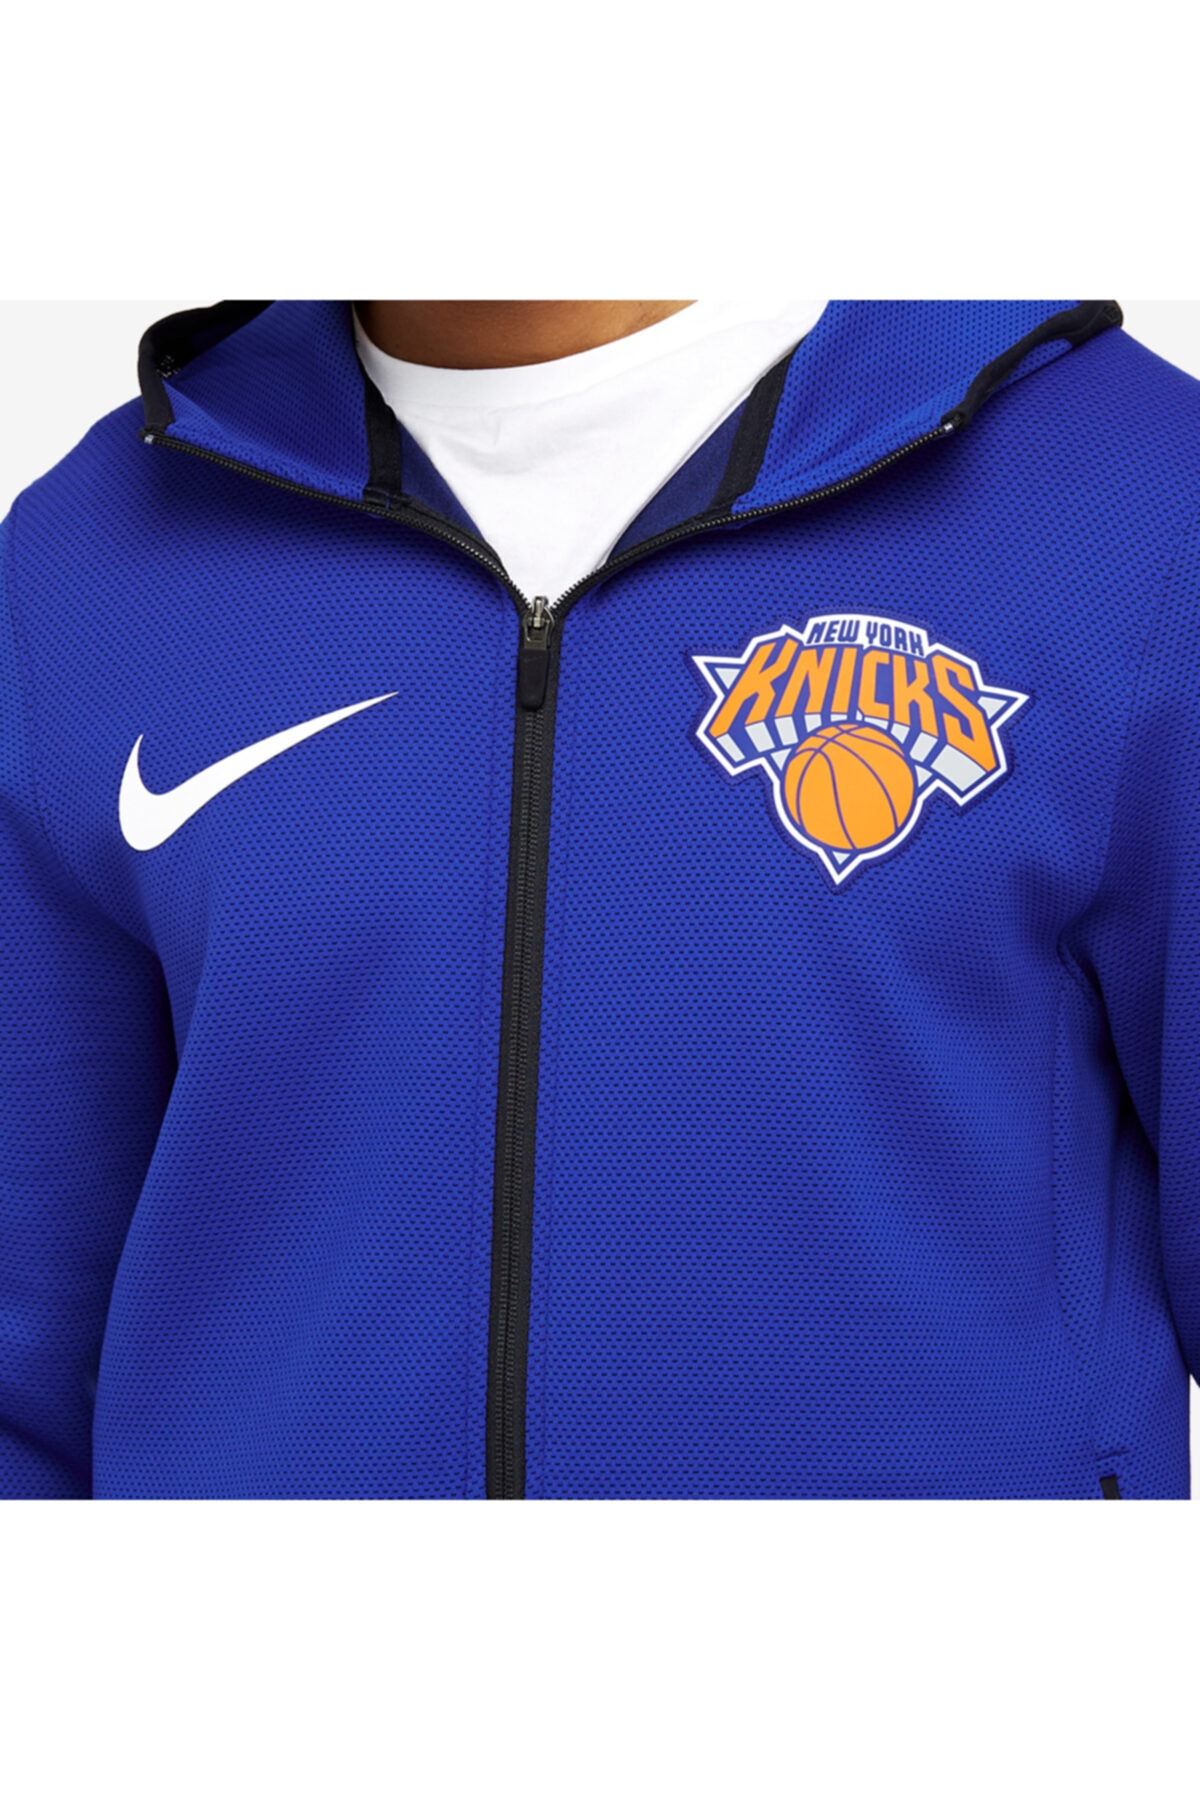 Nike NY Knicks Blue Therma Flex Showtime Hoodie 940148-495 Men's XL for  sale online